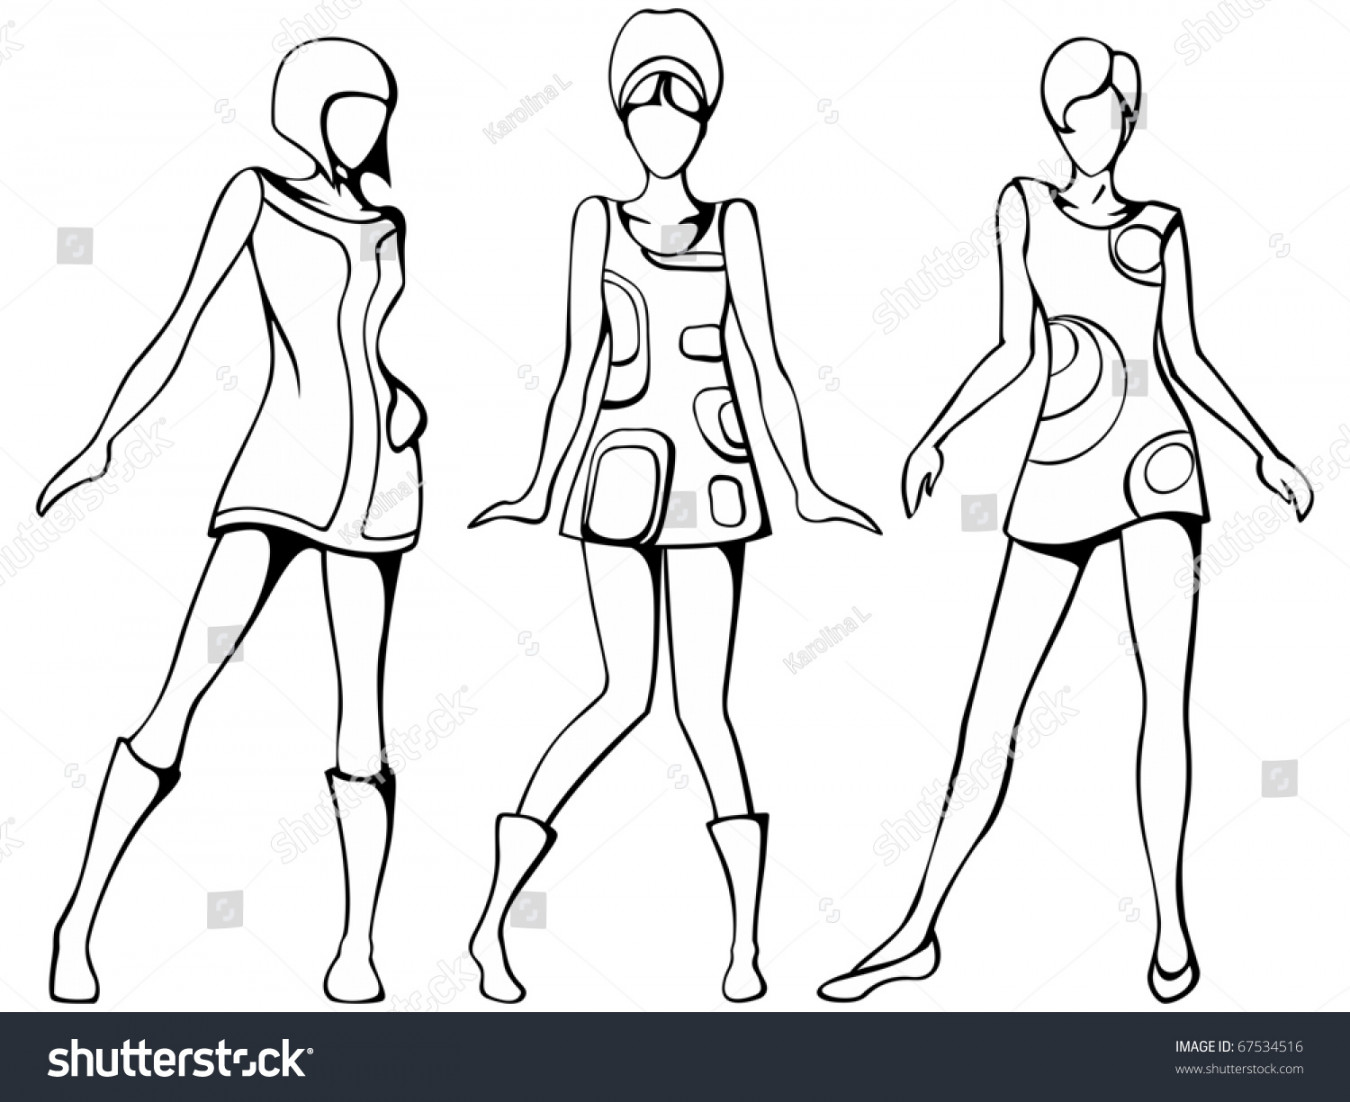 , 960s Fashion Sketch Images, Stock Photos, D objects